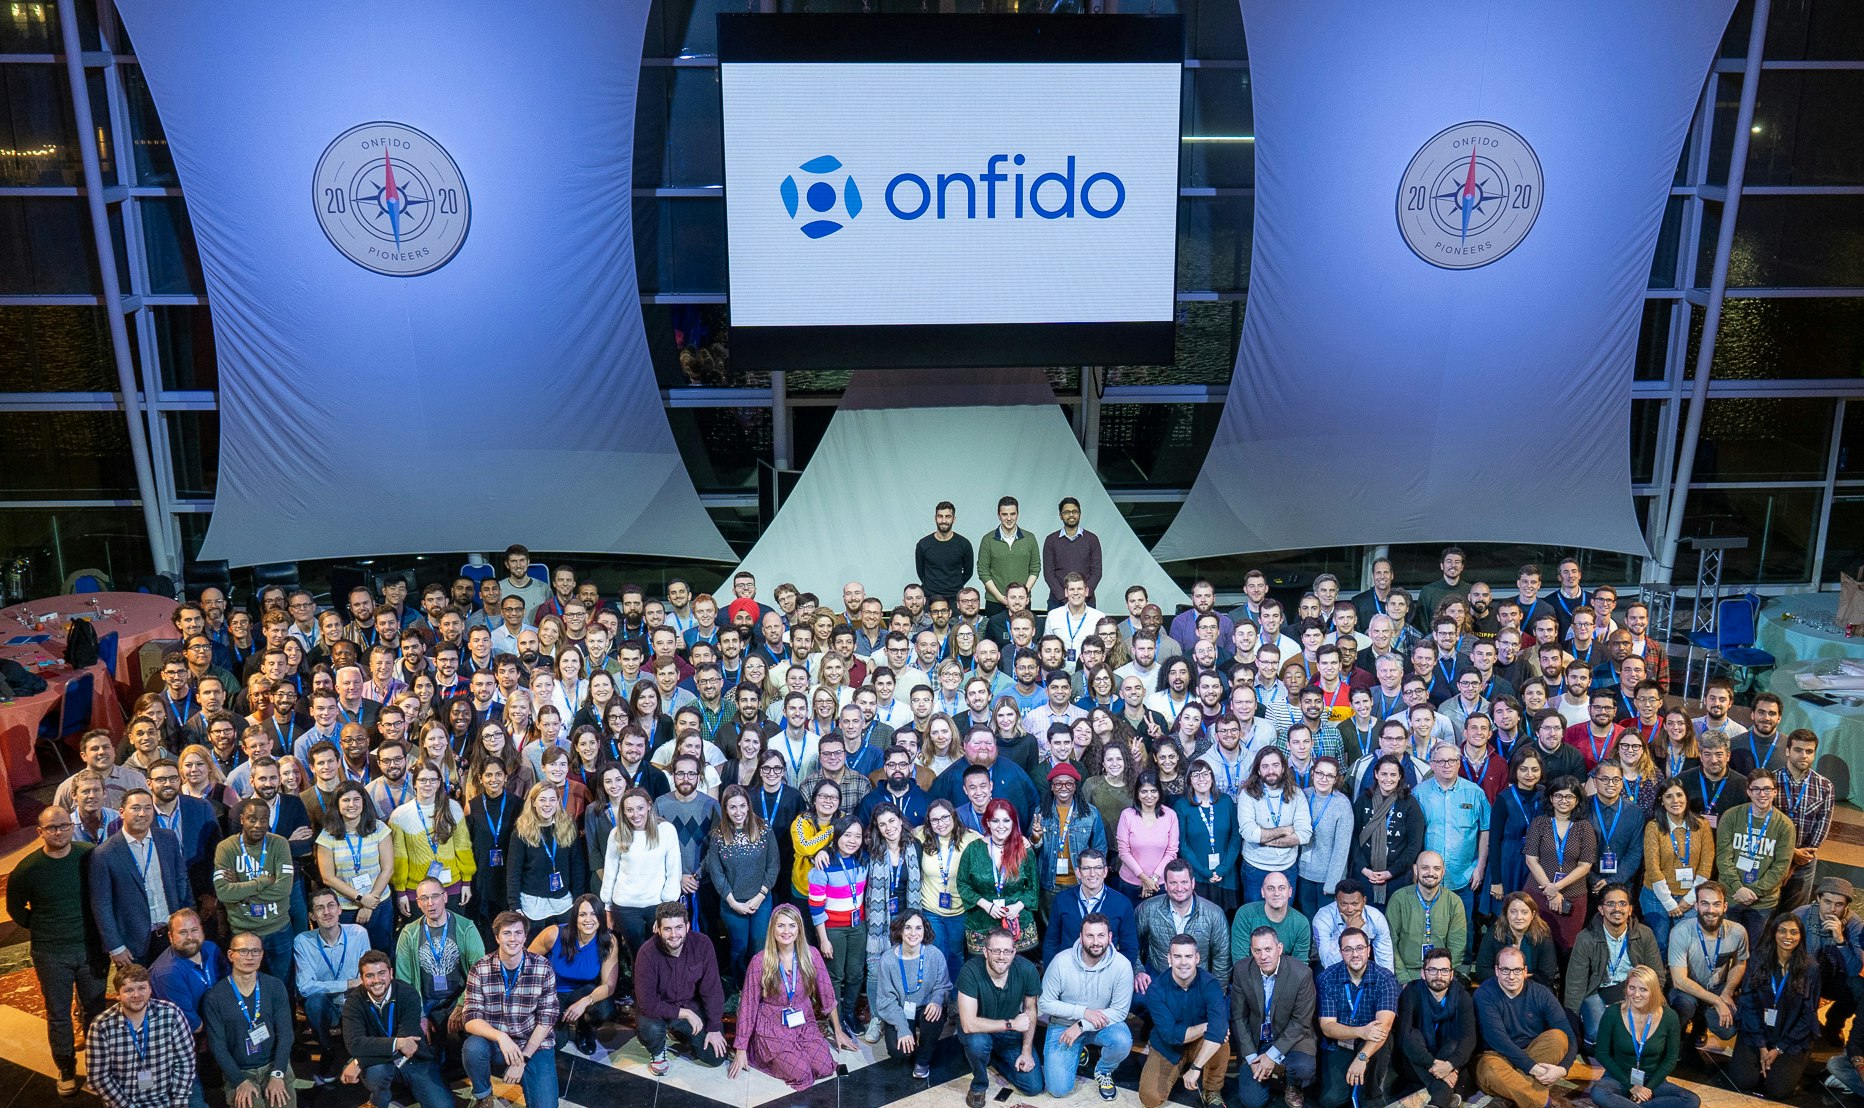 A group shot of the Onfido team in a conference room